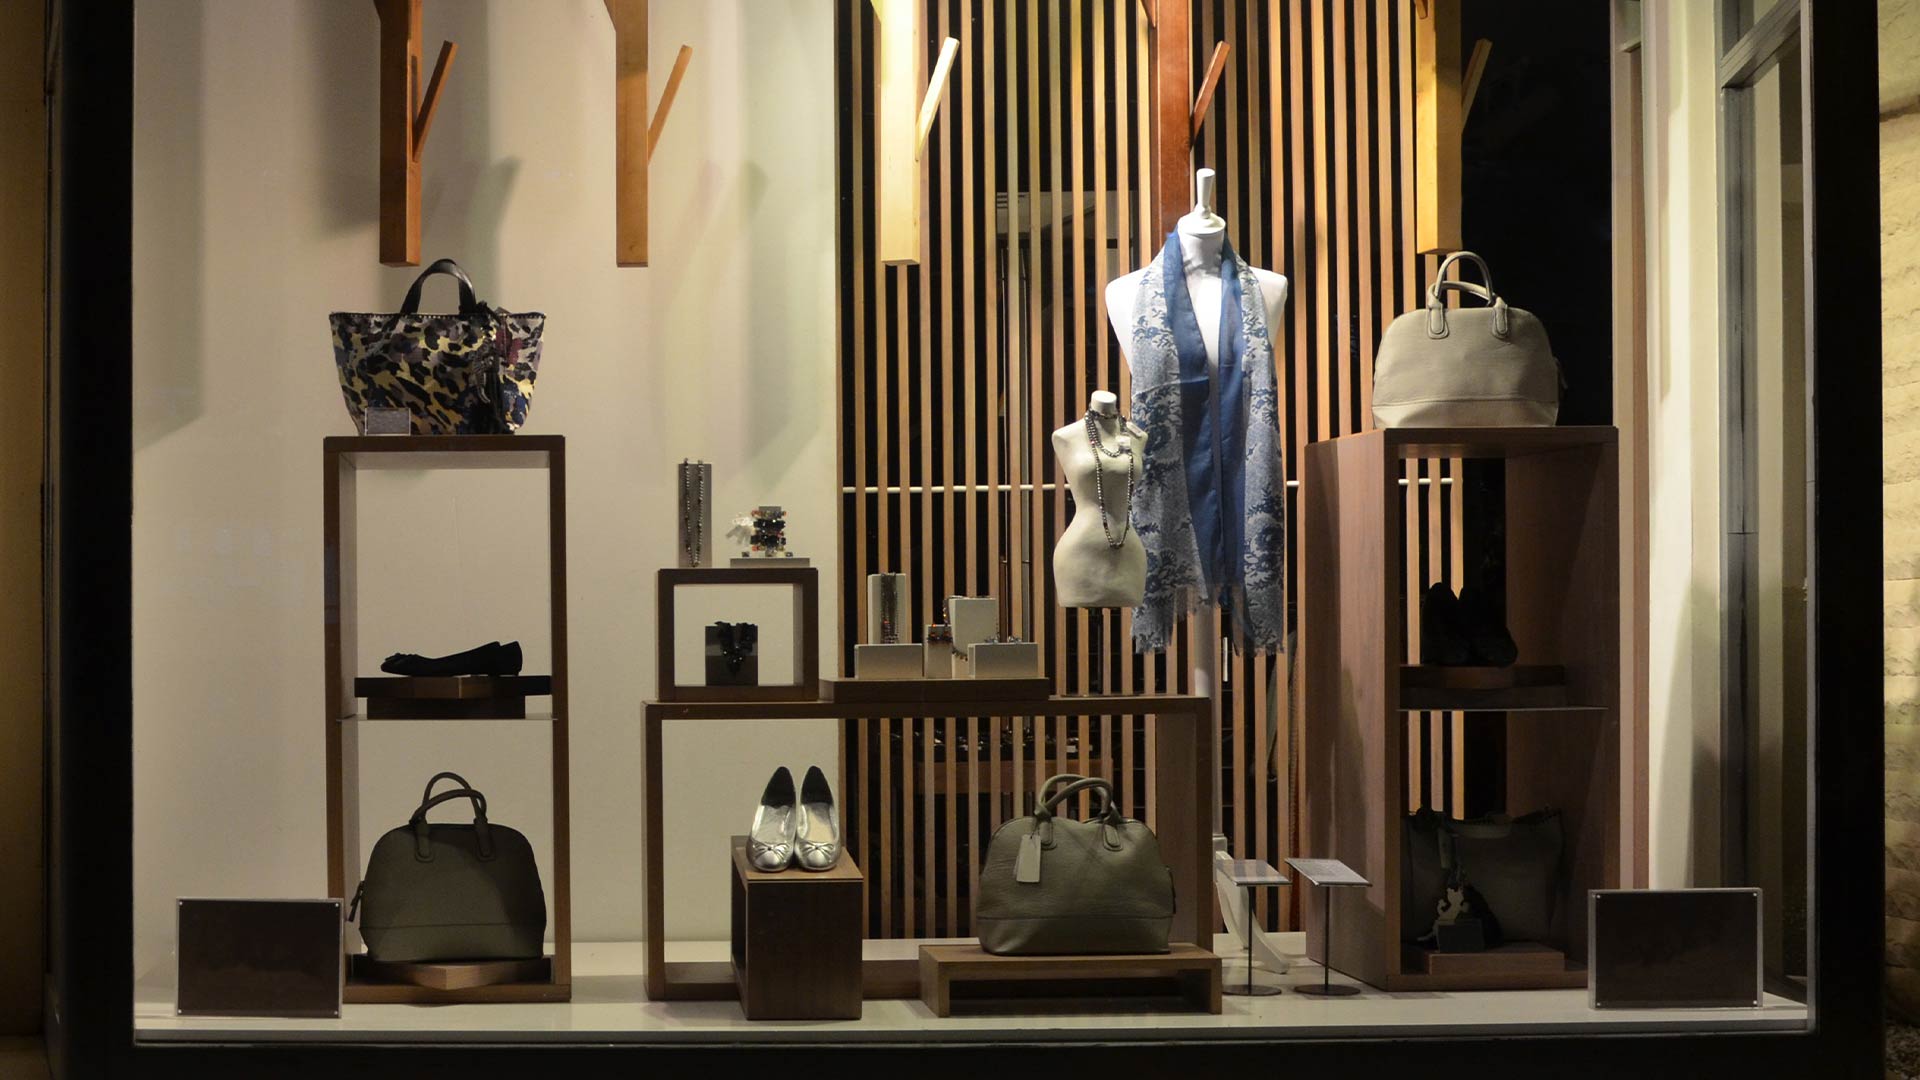 Bags, accessories and apparel from a luxury fashion brand on display